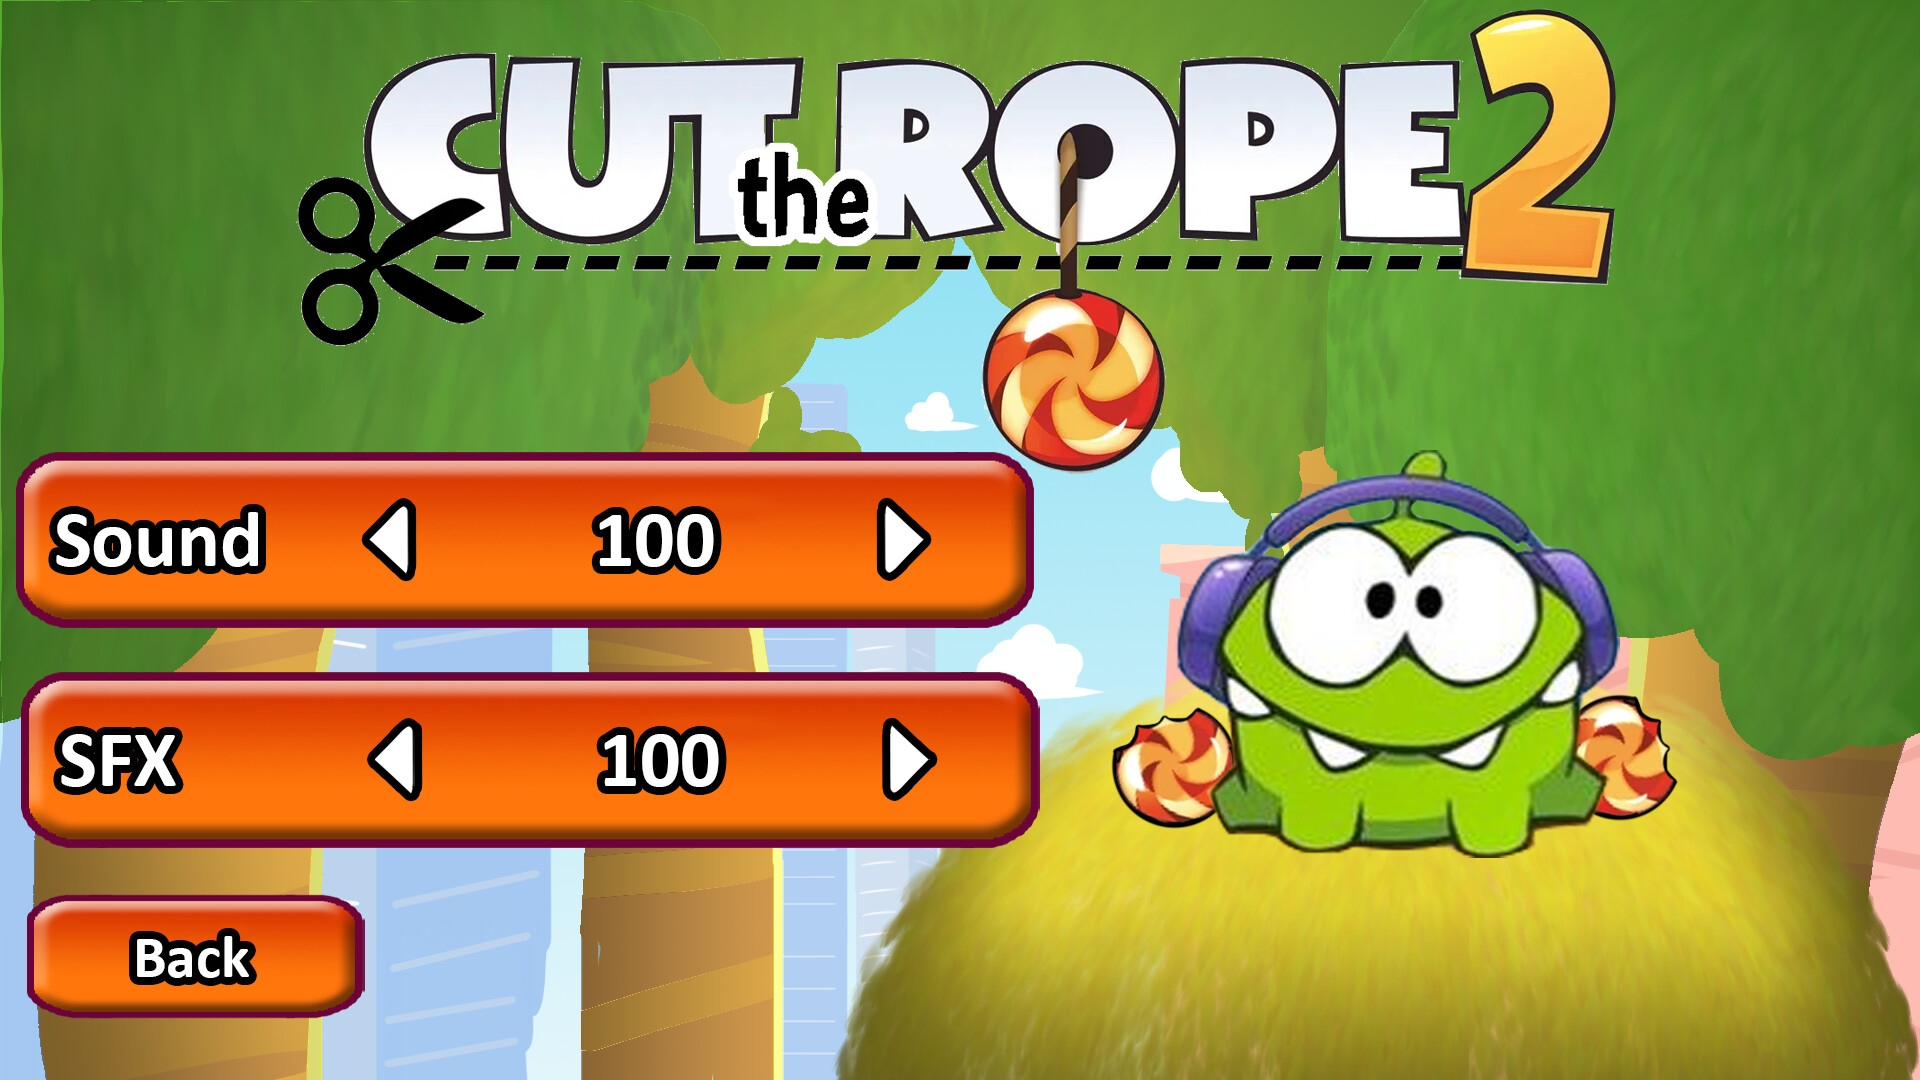 Cut the Rope 2 on Behance